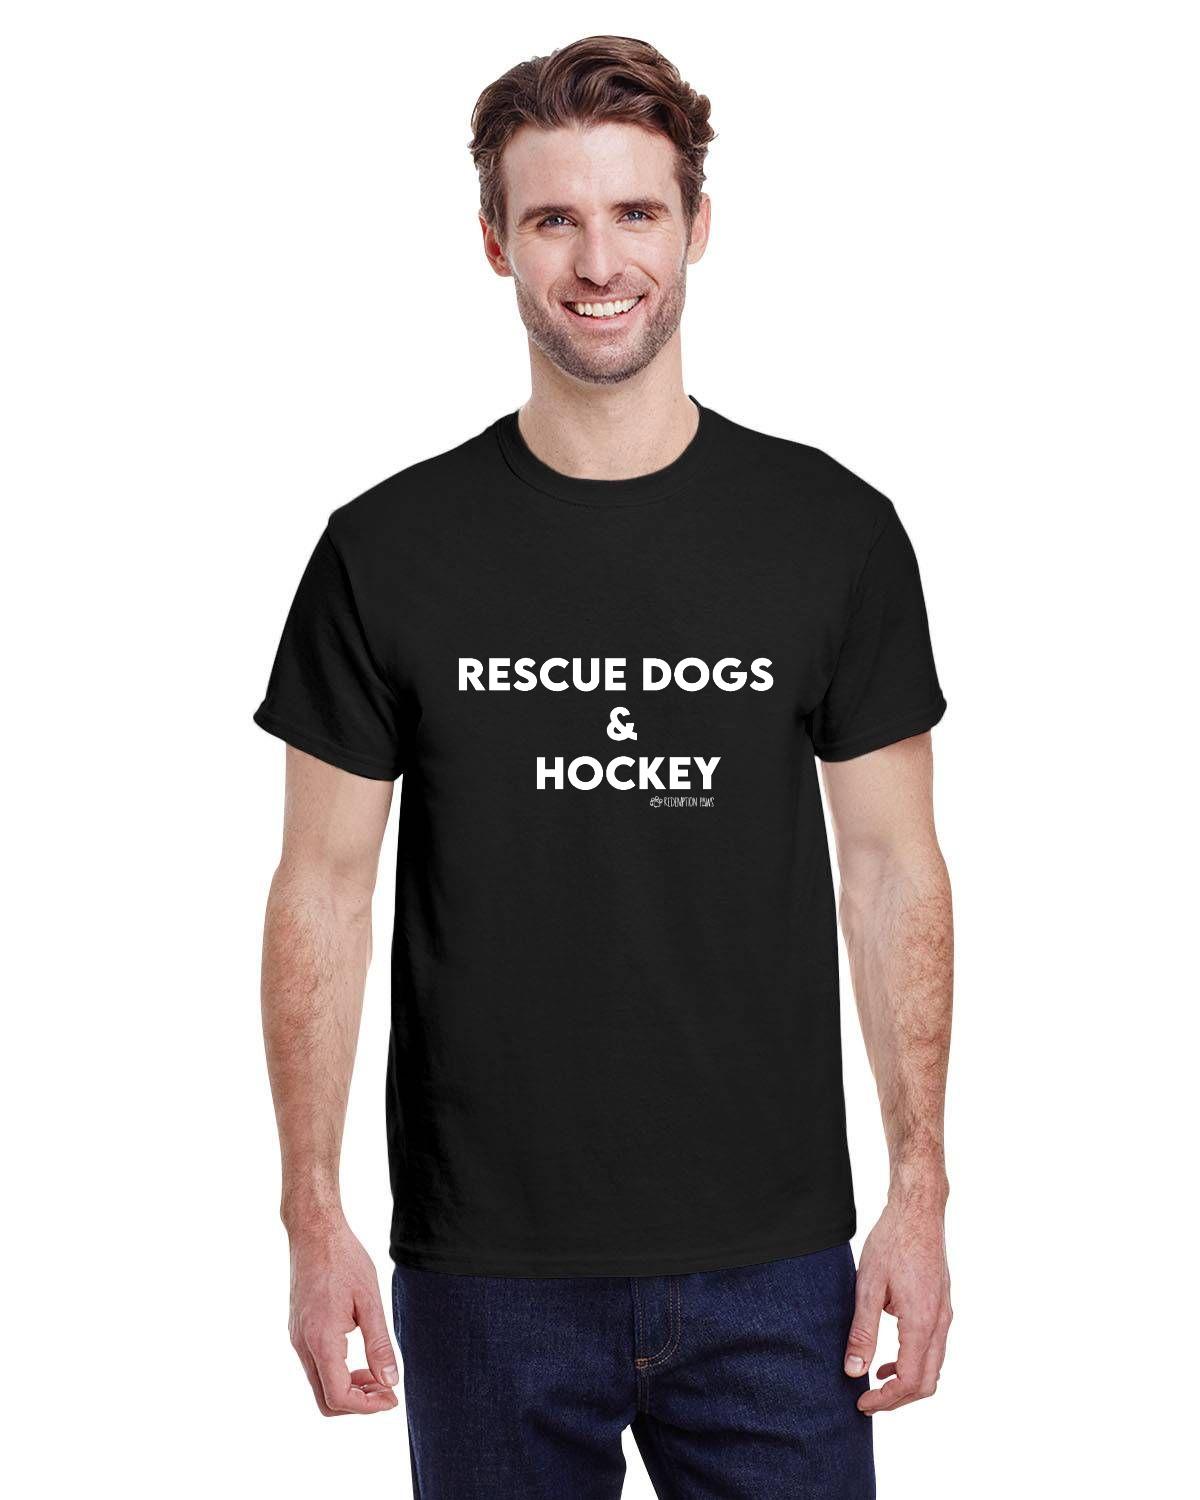 Rescue Dogs and Hockey T-Shirt